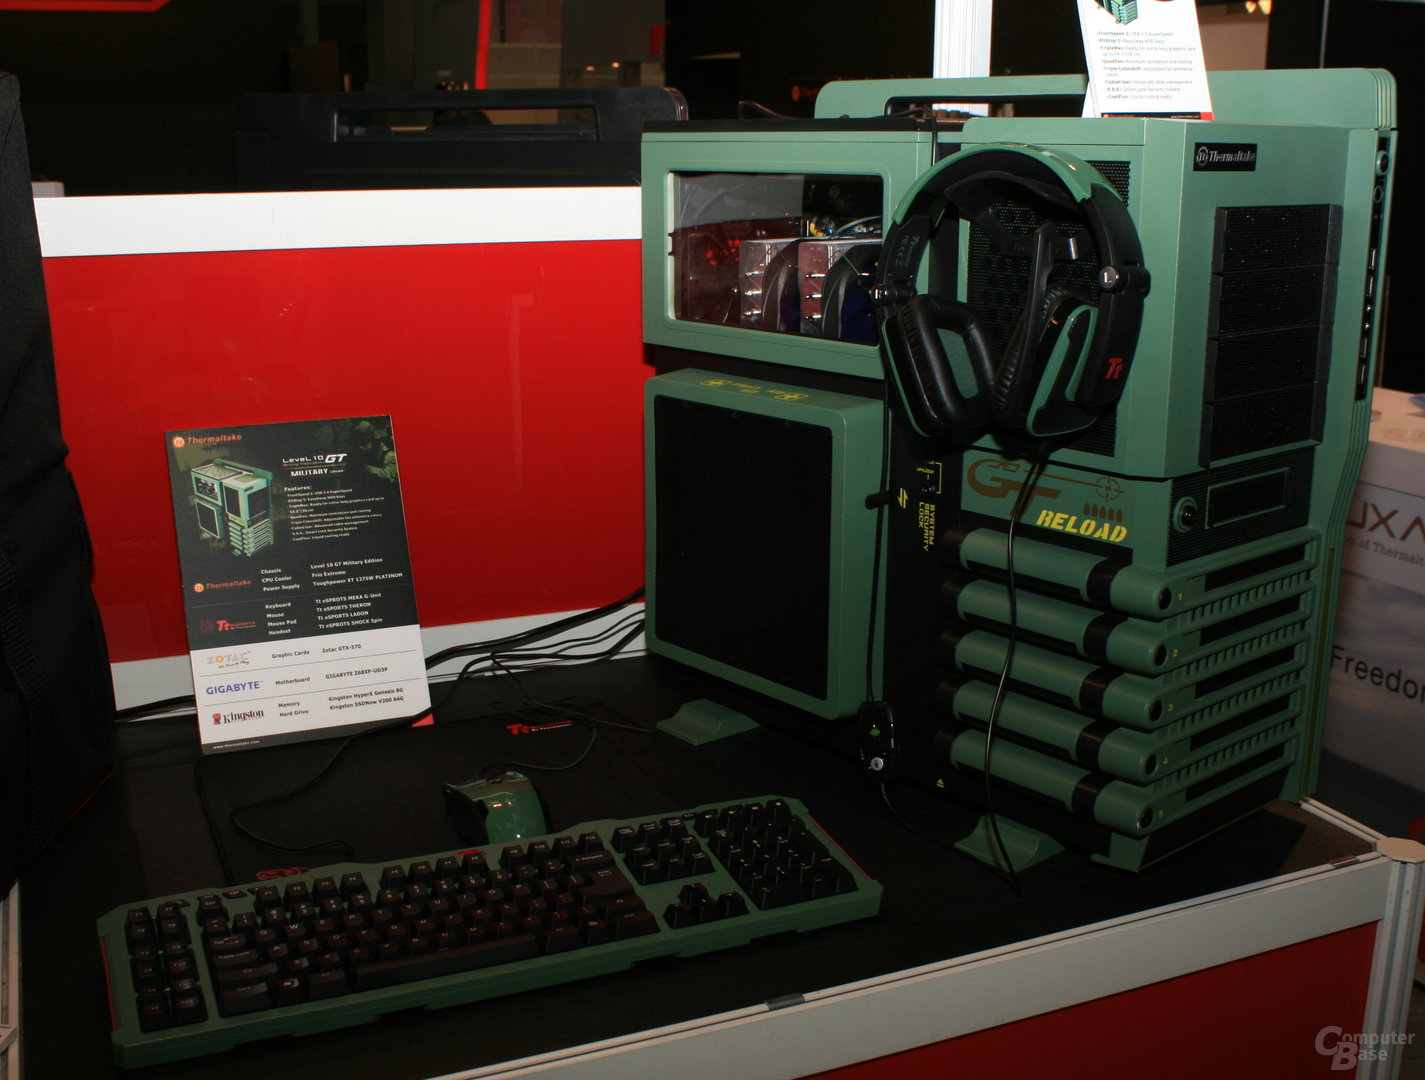 Thermaltake Level 10 GT Military Edition